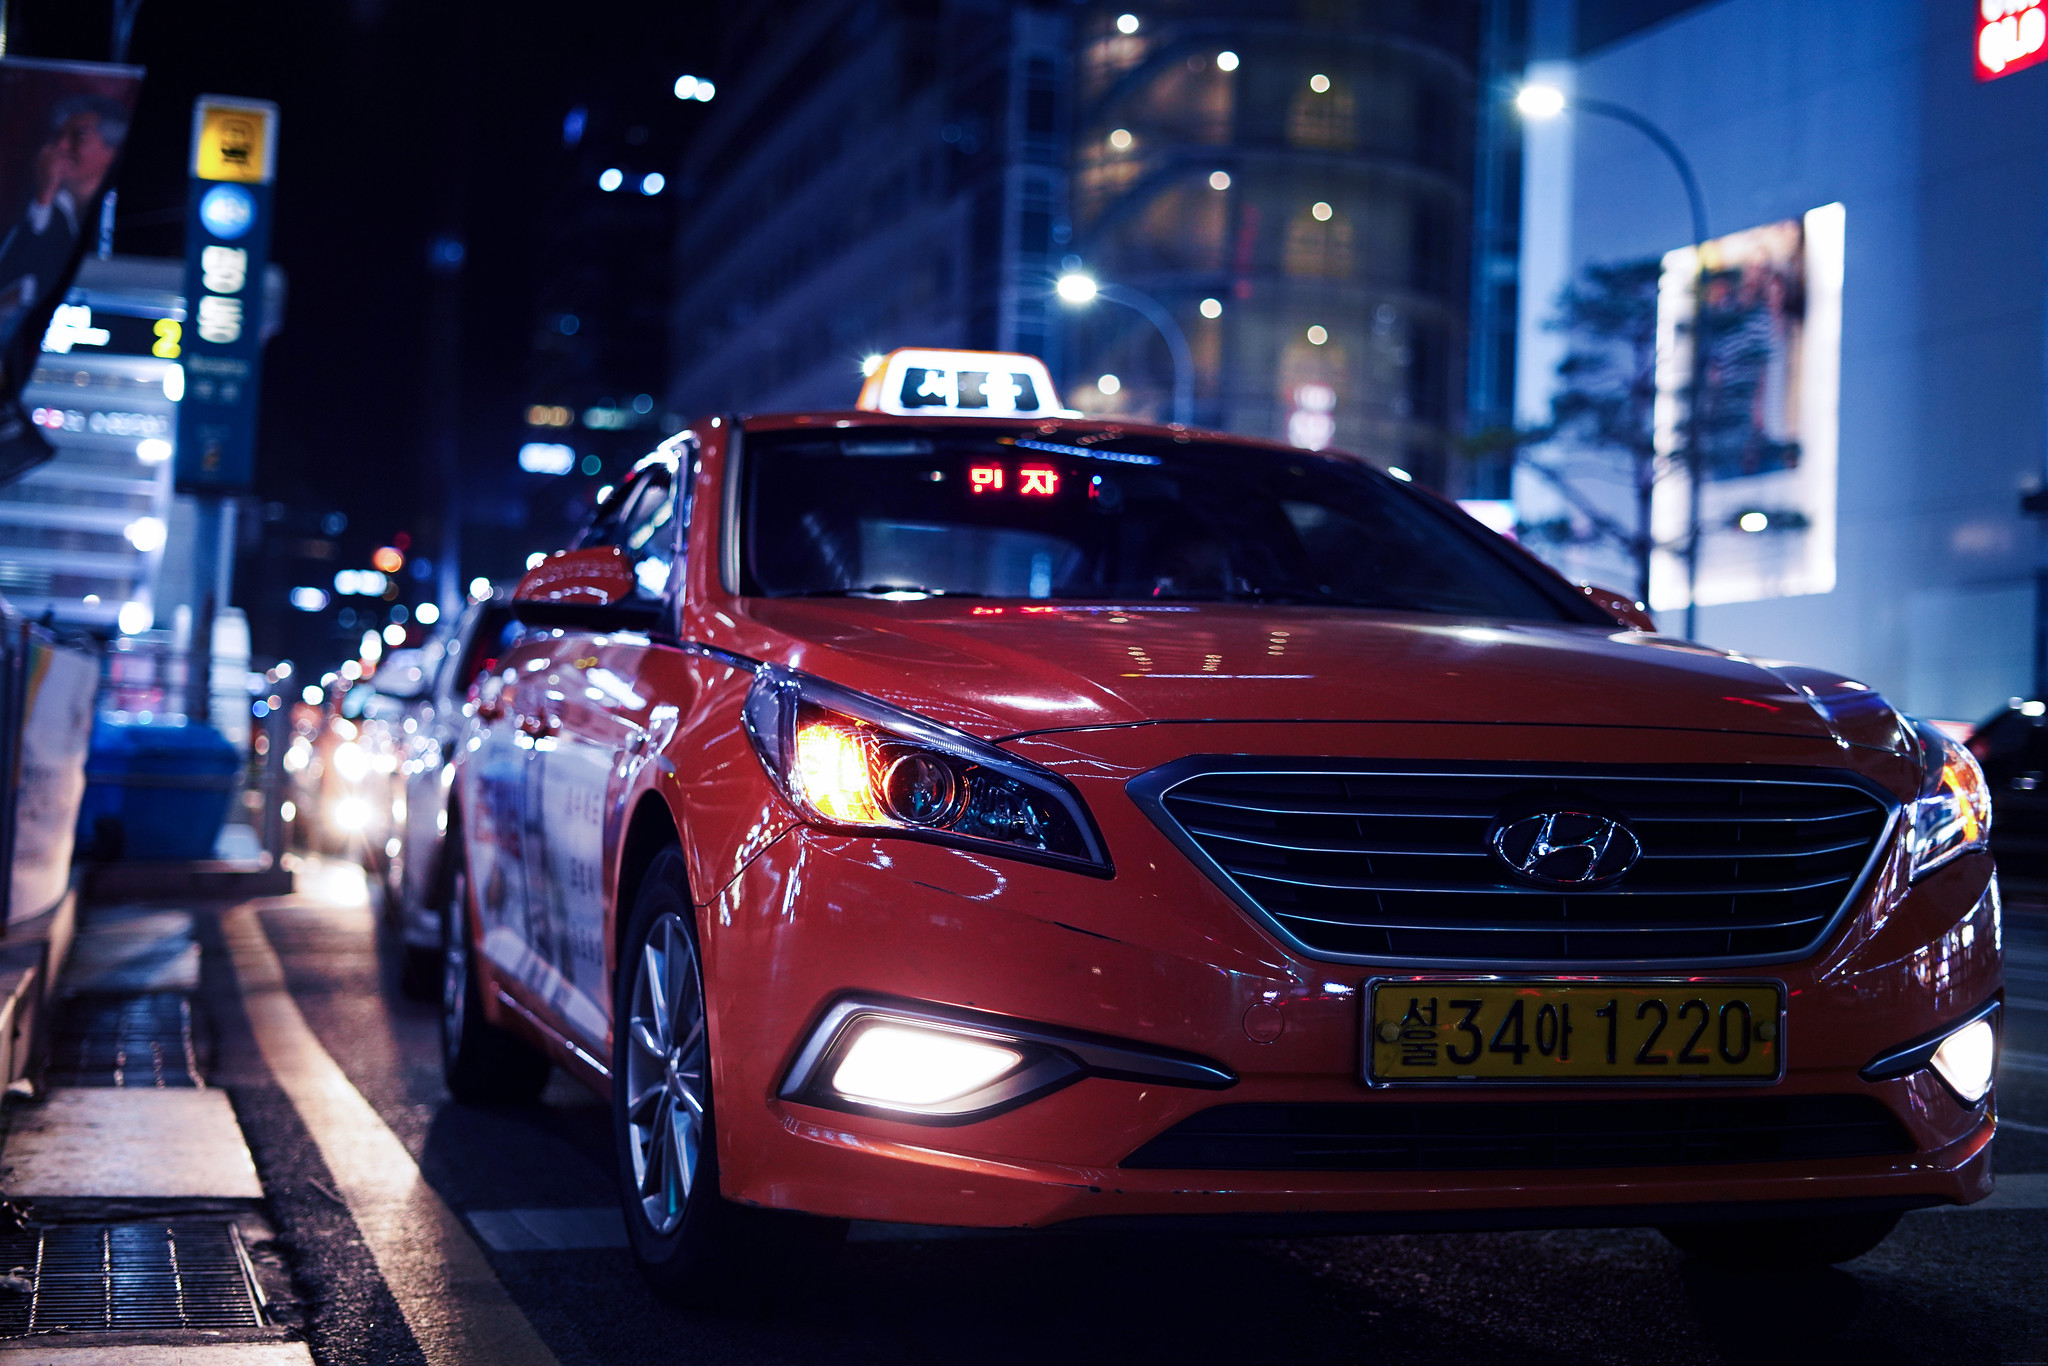 Seoul taxi at night photography_effected